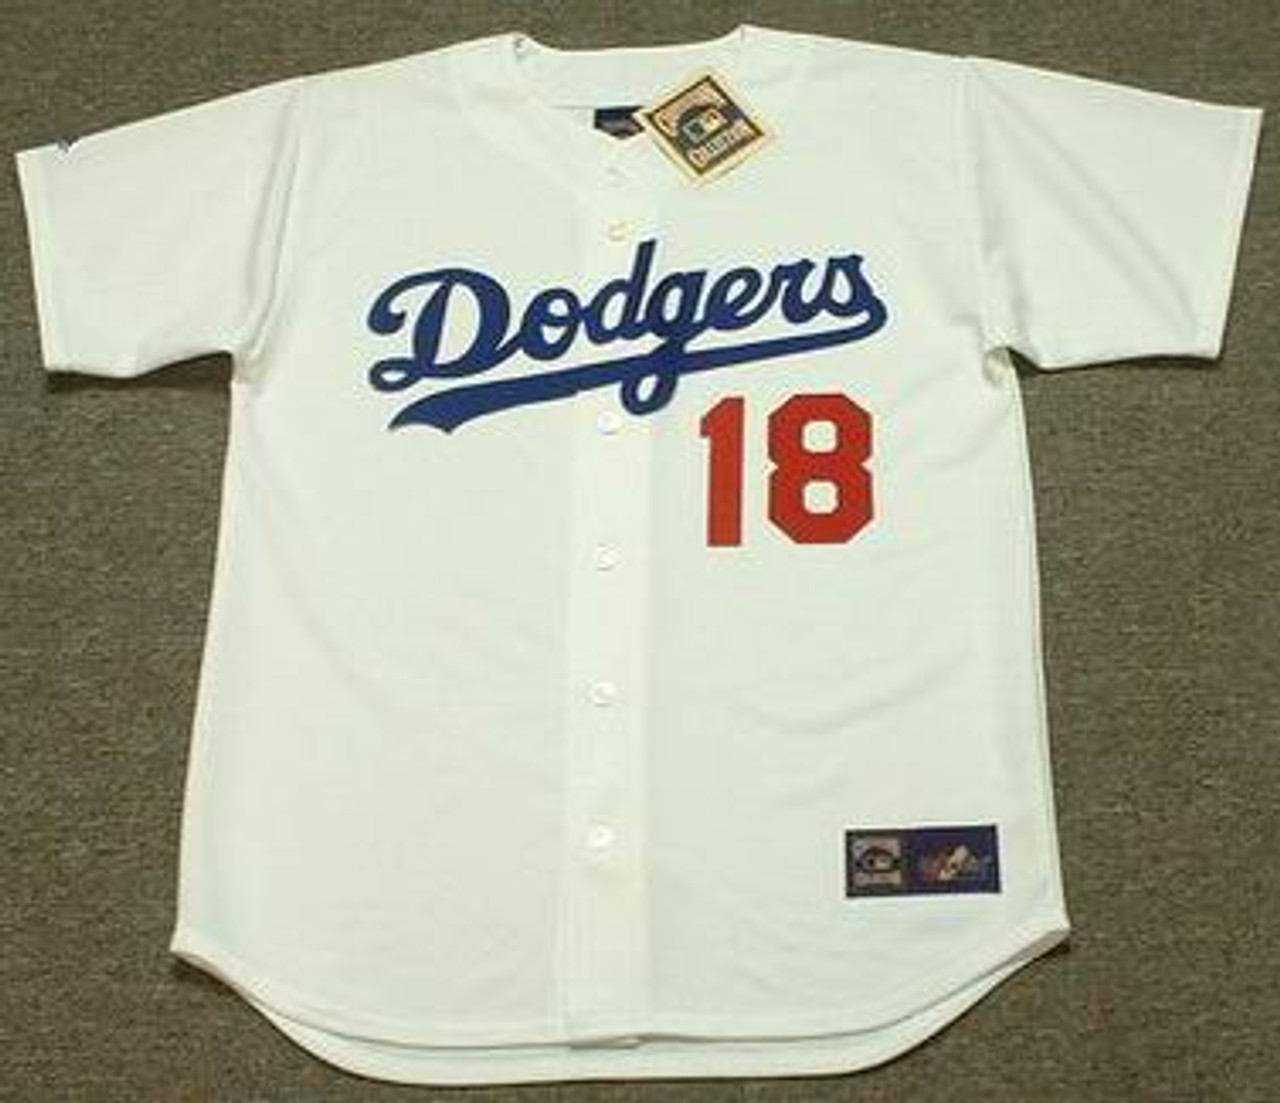 Bill Russell Jersey - Los Angeles Dodgers 1981 Away MLB Throwback Jersey